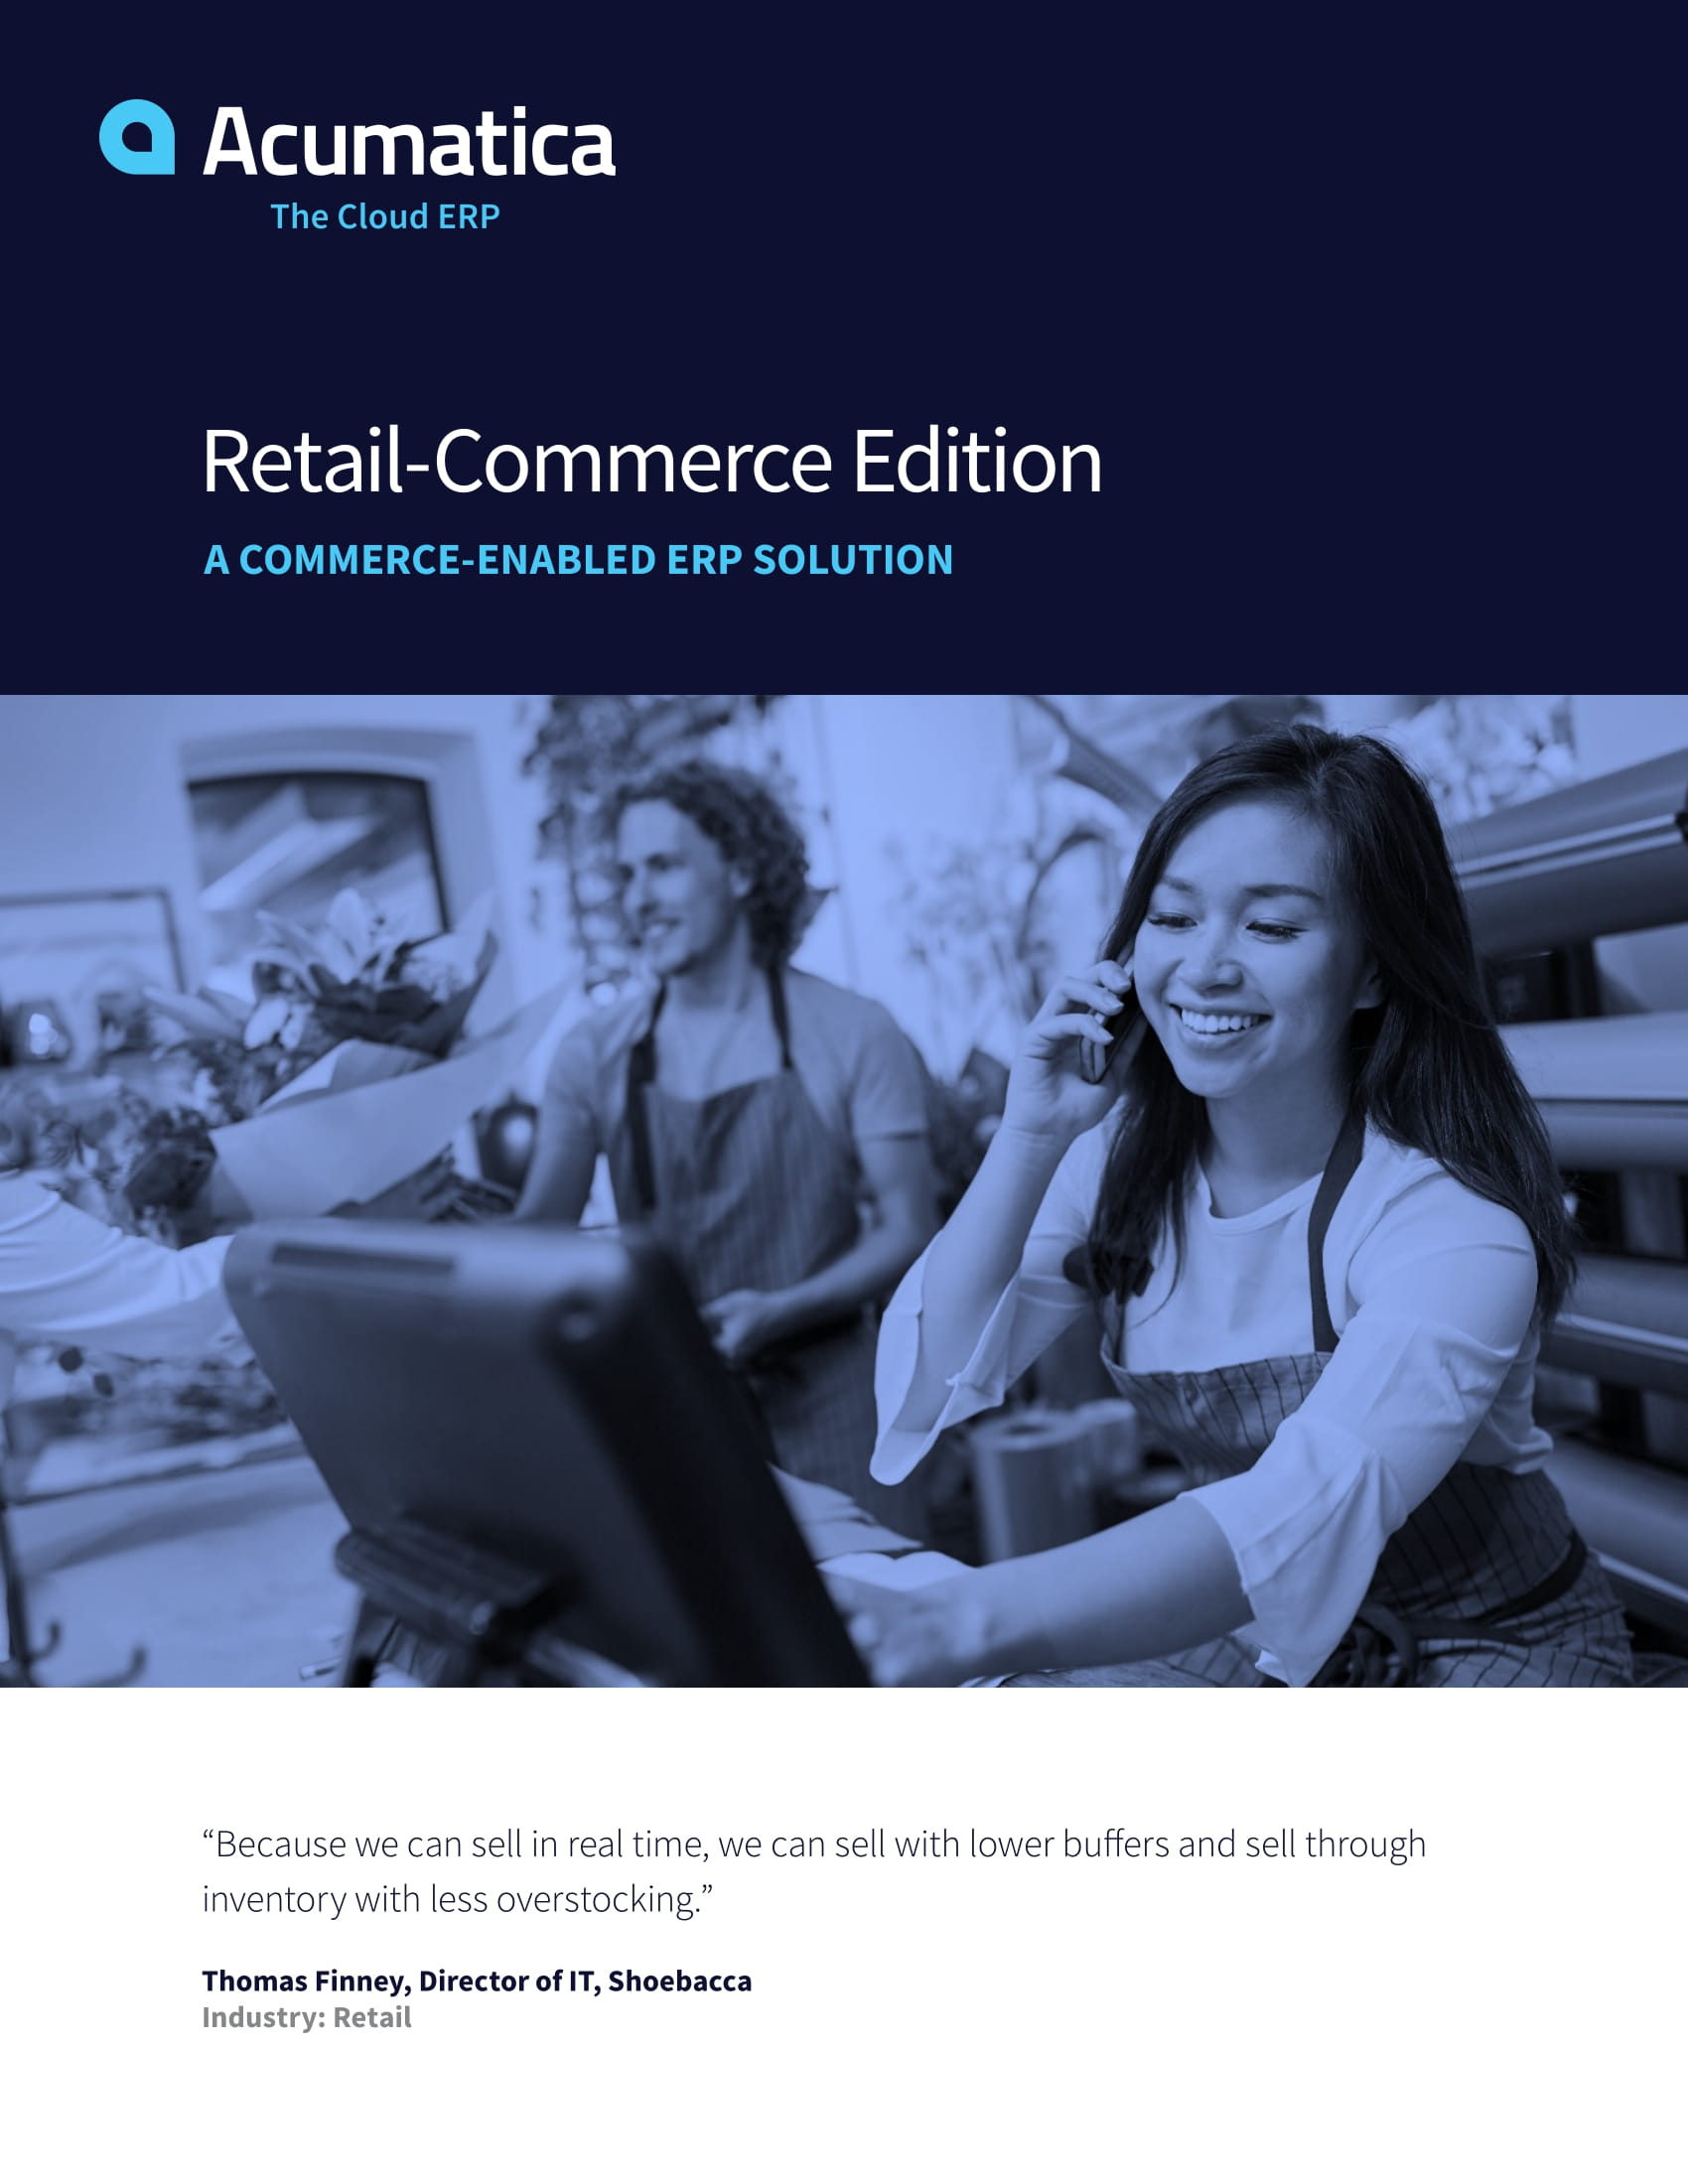 Choose an Commerce-Enabled ERP That Supports Your Whole Business